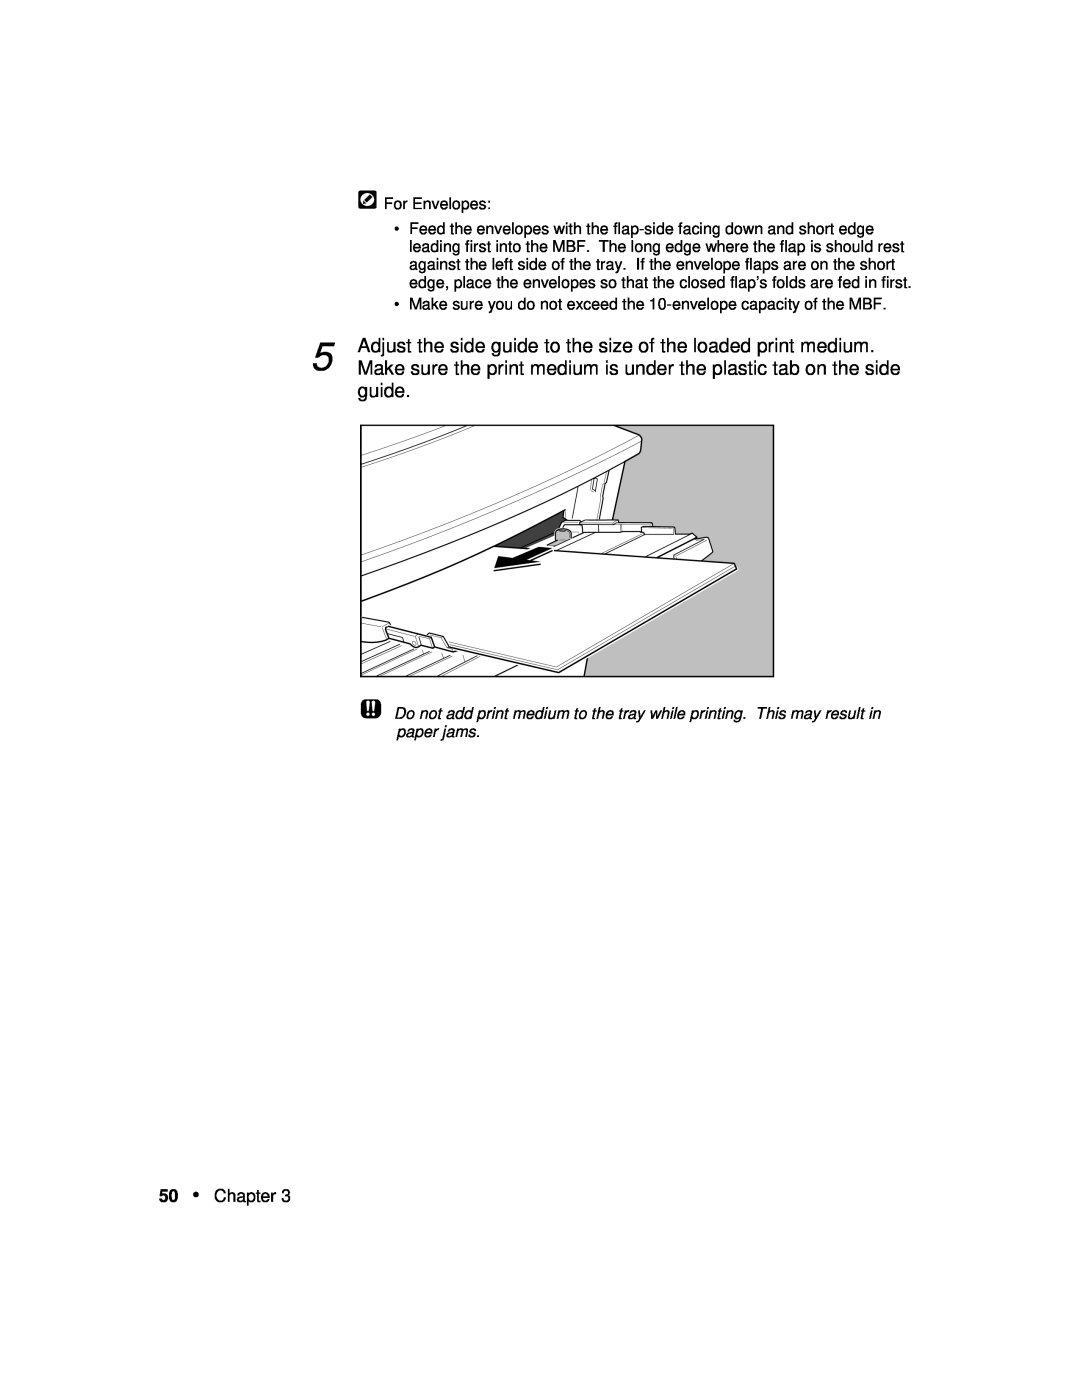 Xerox P12 manual Adjust the side guide to the size of the loaded print medium, Chapter 